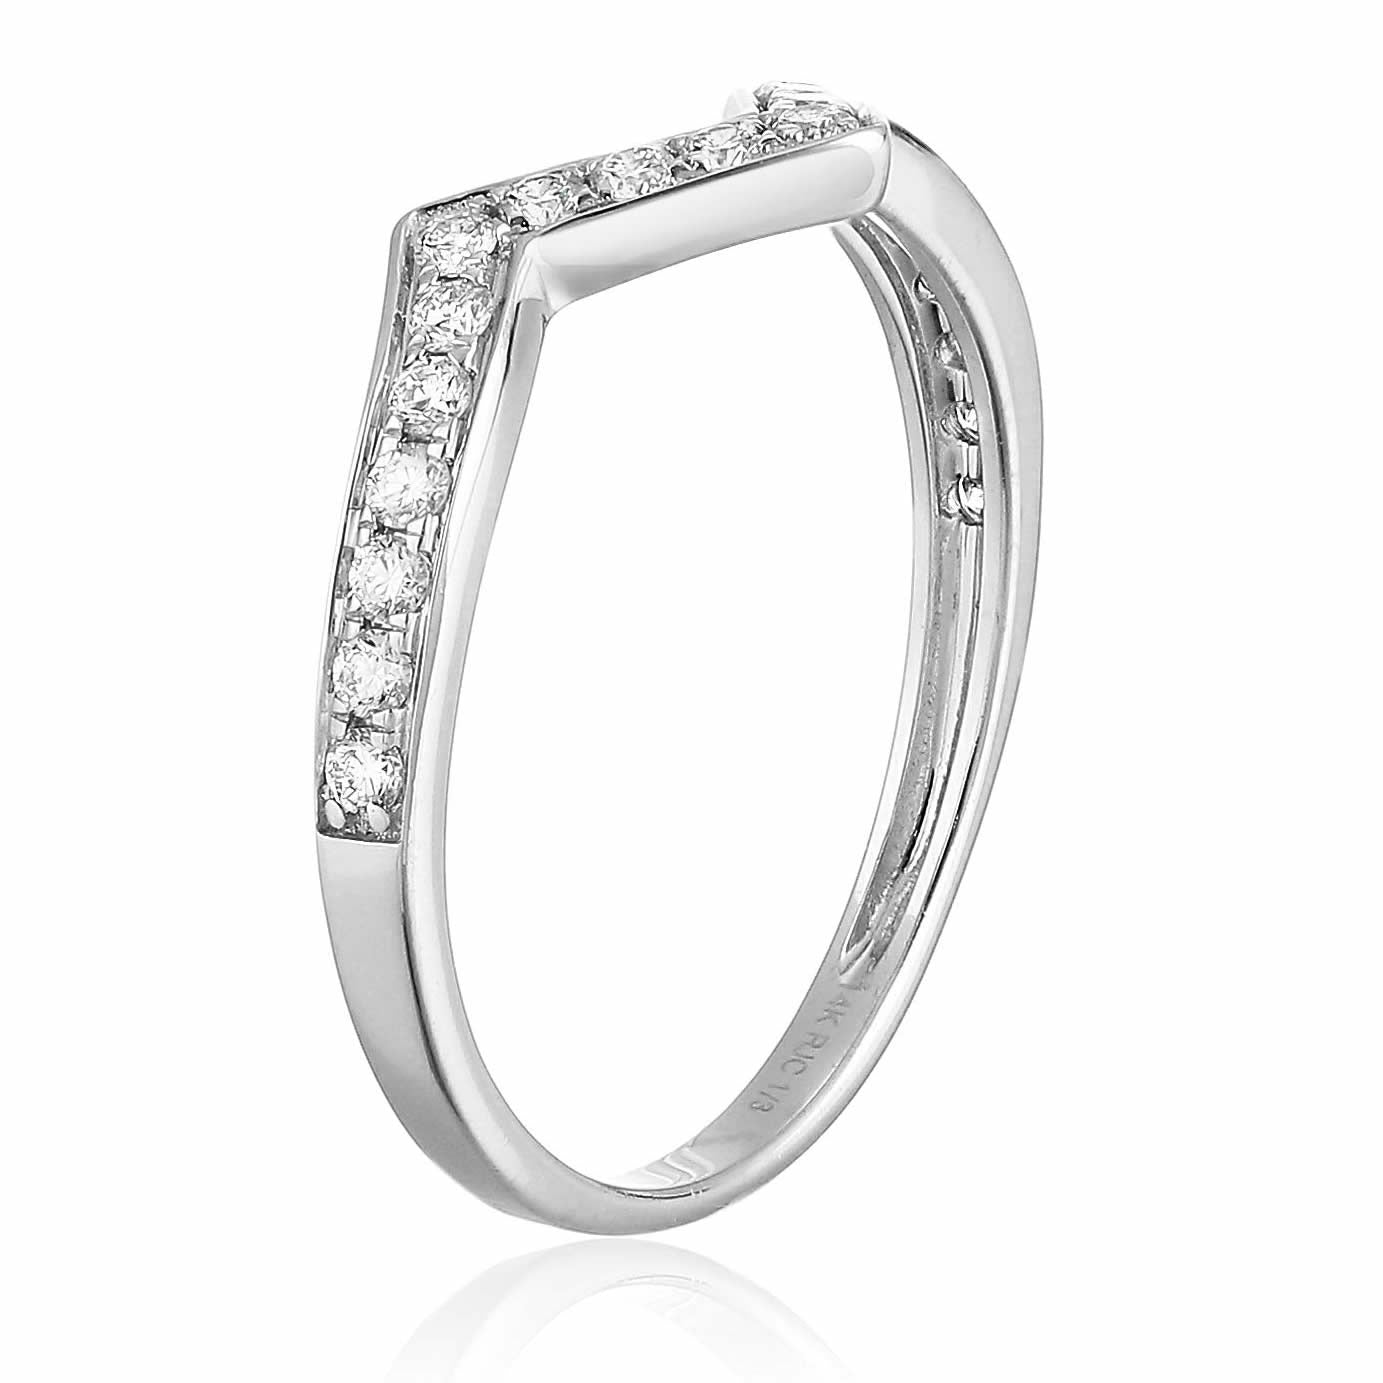 1/3 cttw Diamond Wedding Band for Women, Heartbeat Wave Style Wedding Band in 14K White Gold, Size 4.5-10